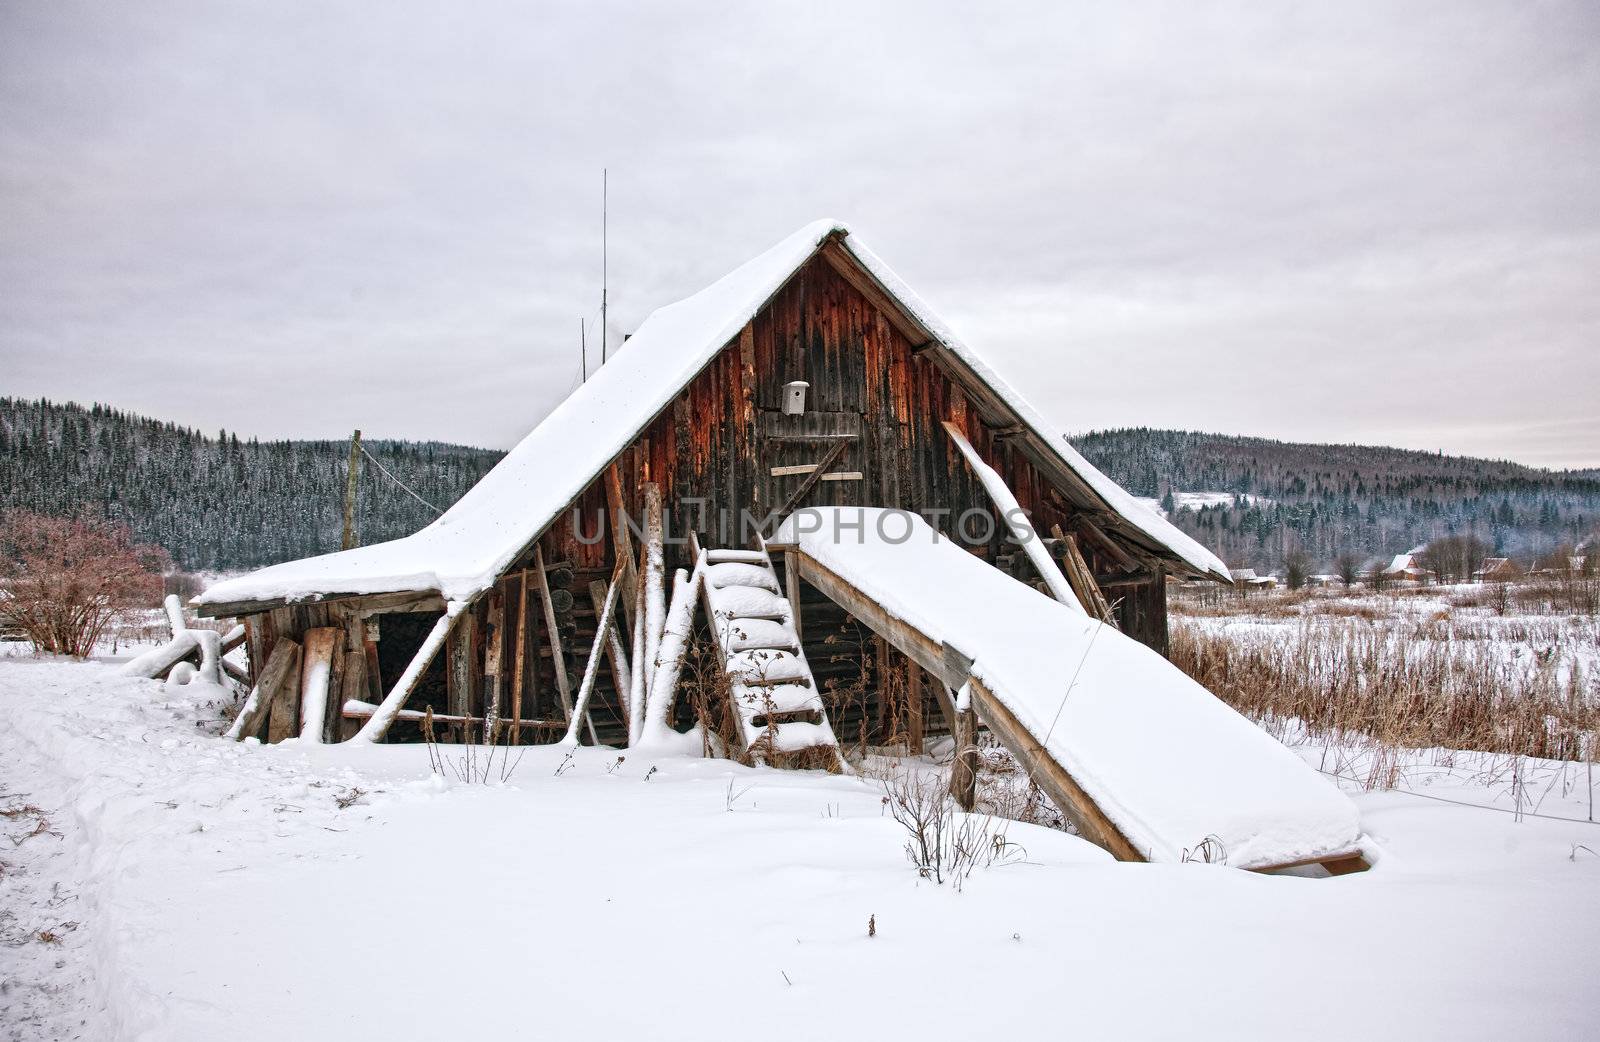  old wooden house in siberia forest